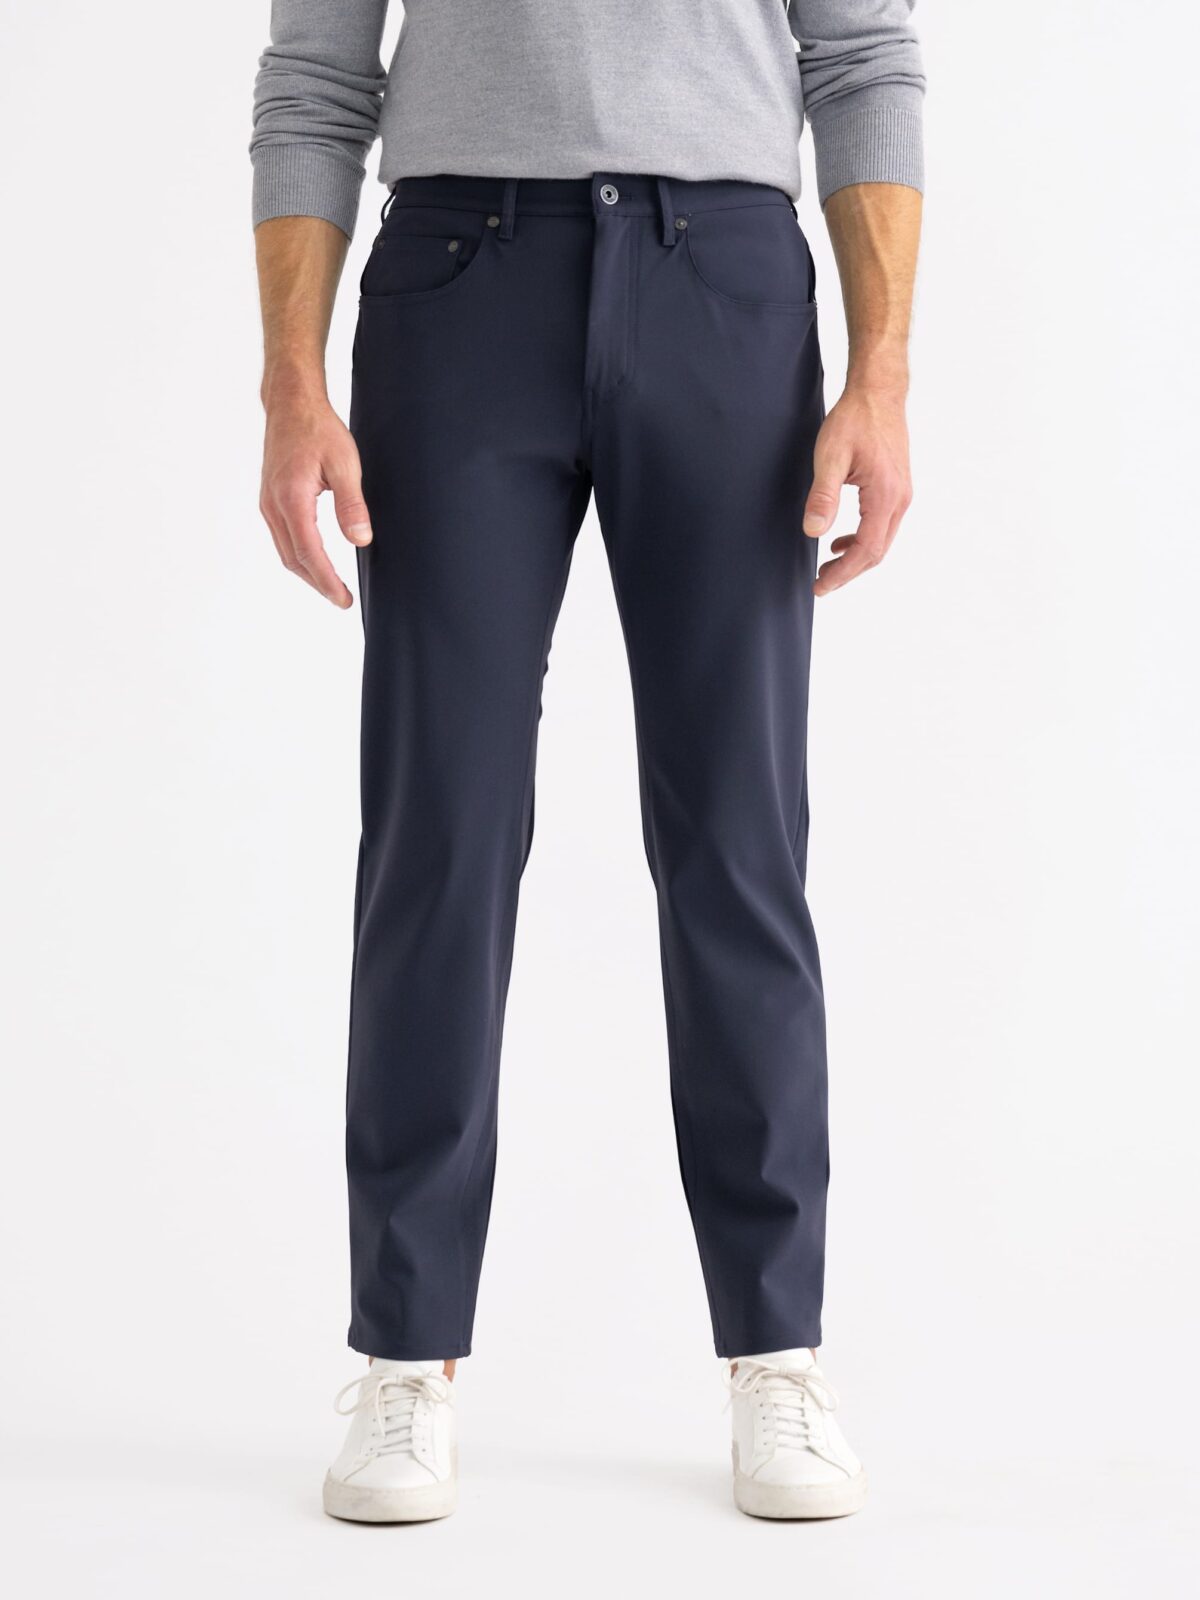 Brooks Brothers Milano Fit Linen and Cotton Chino Pants NWT - Oatmeal |  Cotton chino pants, Cotton chinos, Chinos pants